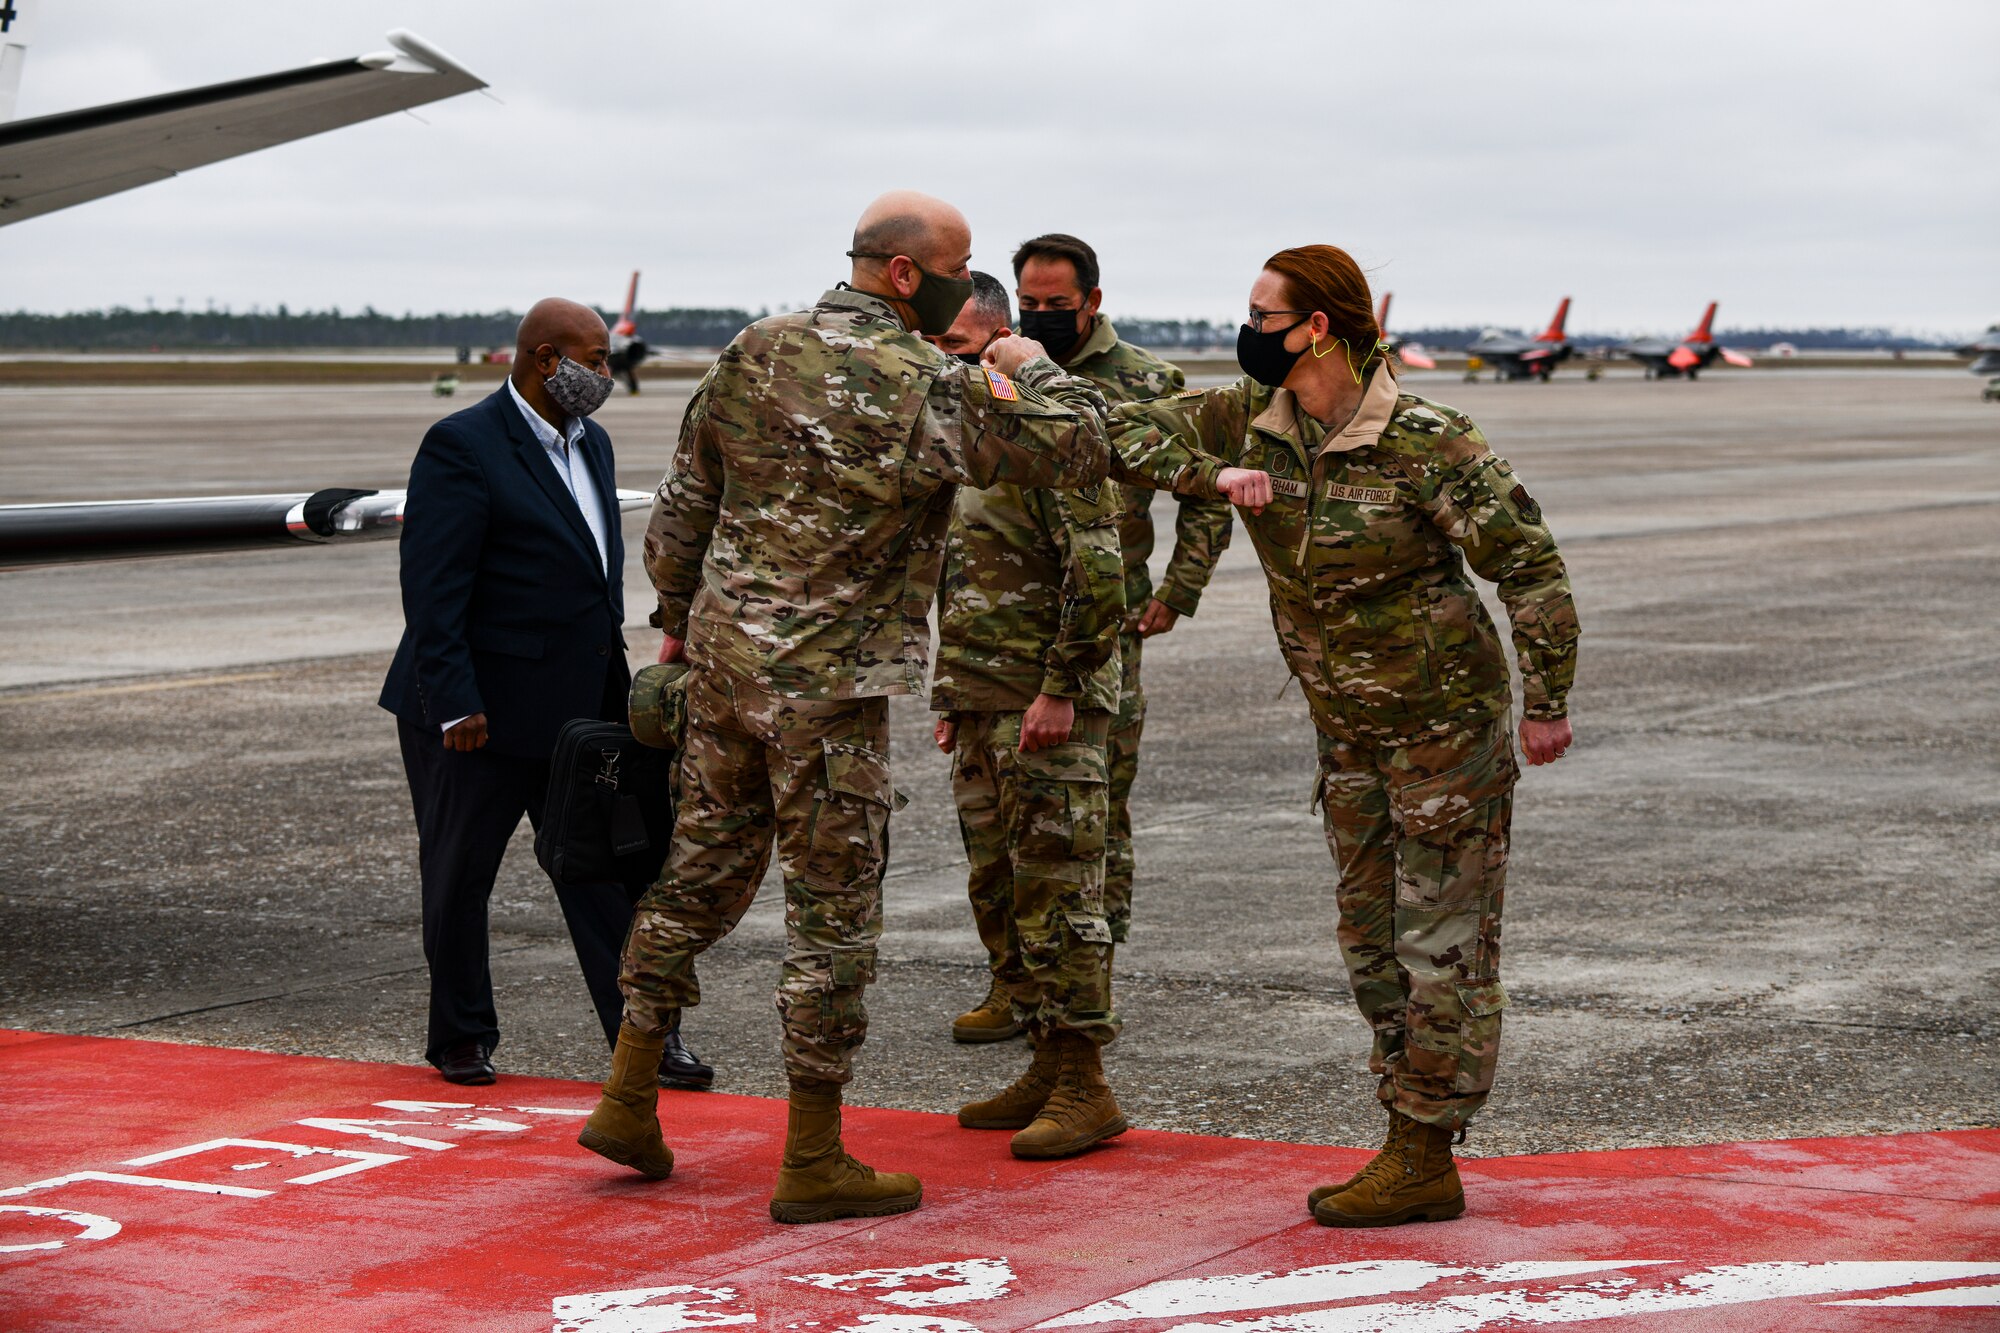 U.S. Army Lt. Gen. Scott A. Spellmon, Commanding General of the U.S. Army Corps of Engineers, greets U.S. Air Force Chief Master Sgt. Katie Grabham, 325th Fighter Wing command chief, at Tyndall Air Force Base, Florida, March 2, 2021. Spellmon visited Tyndall to engage with leadership and gain a better understanding of  strategic objectives. (U.S. Air Force photo by Staff Sgt. Stefan Alvarez)